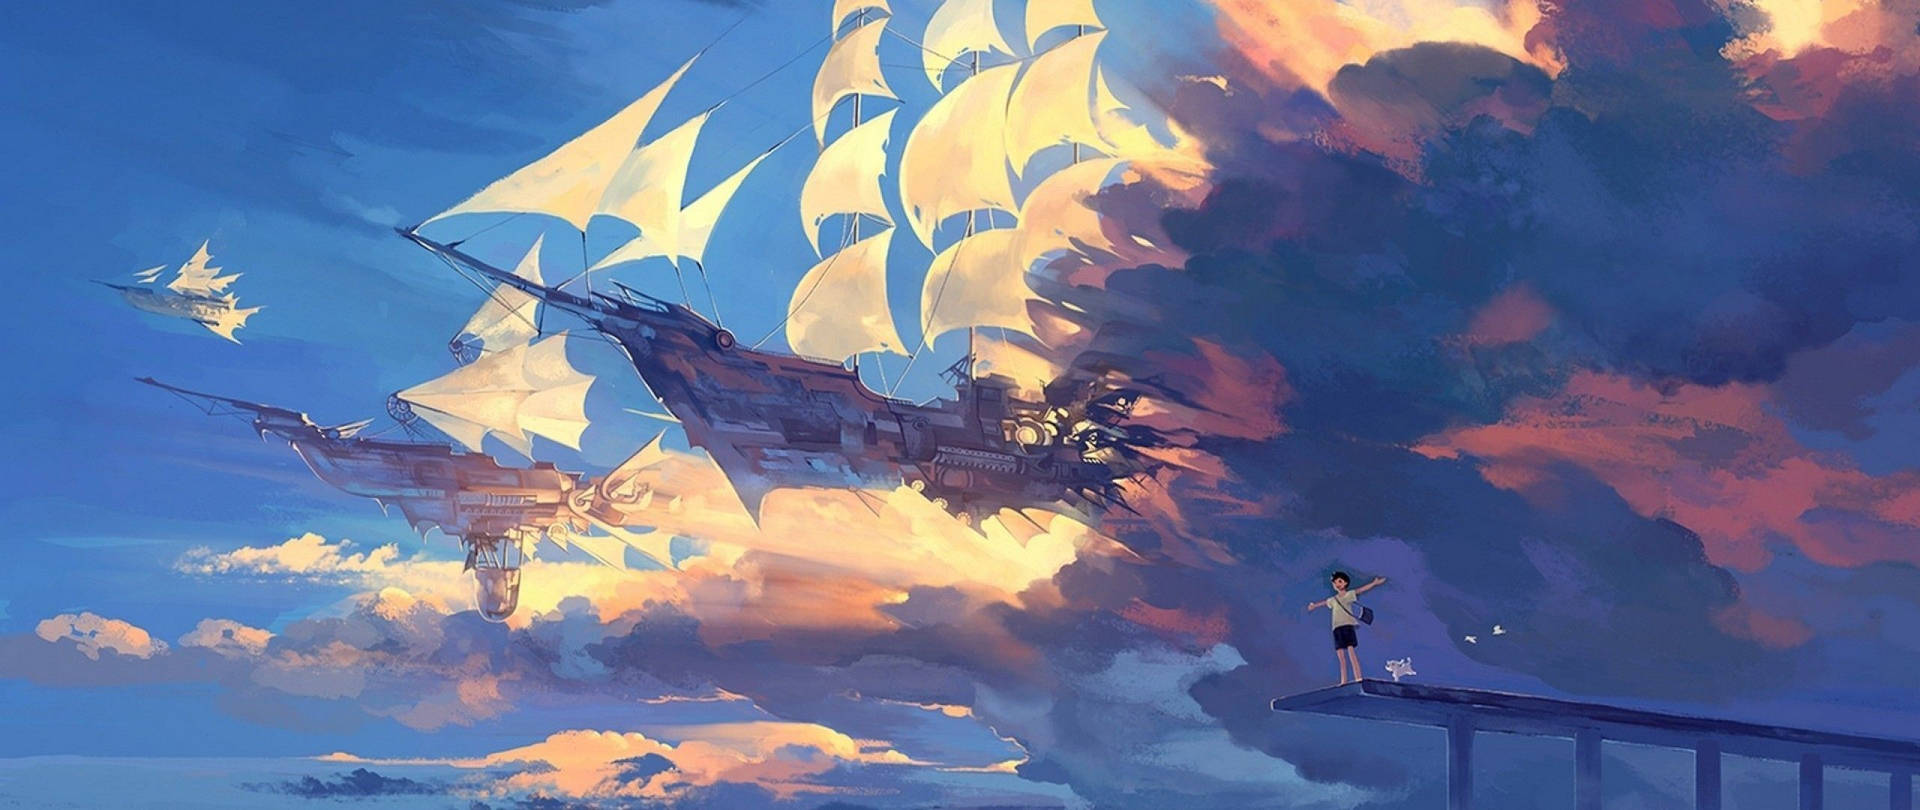 Blue Anime Galleon Ships Aesthetic Background